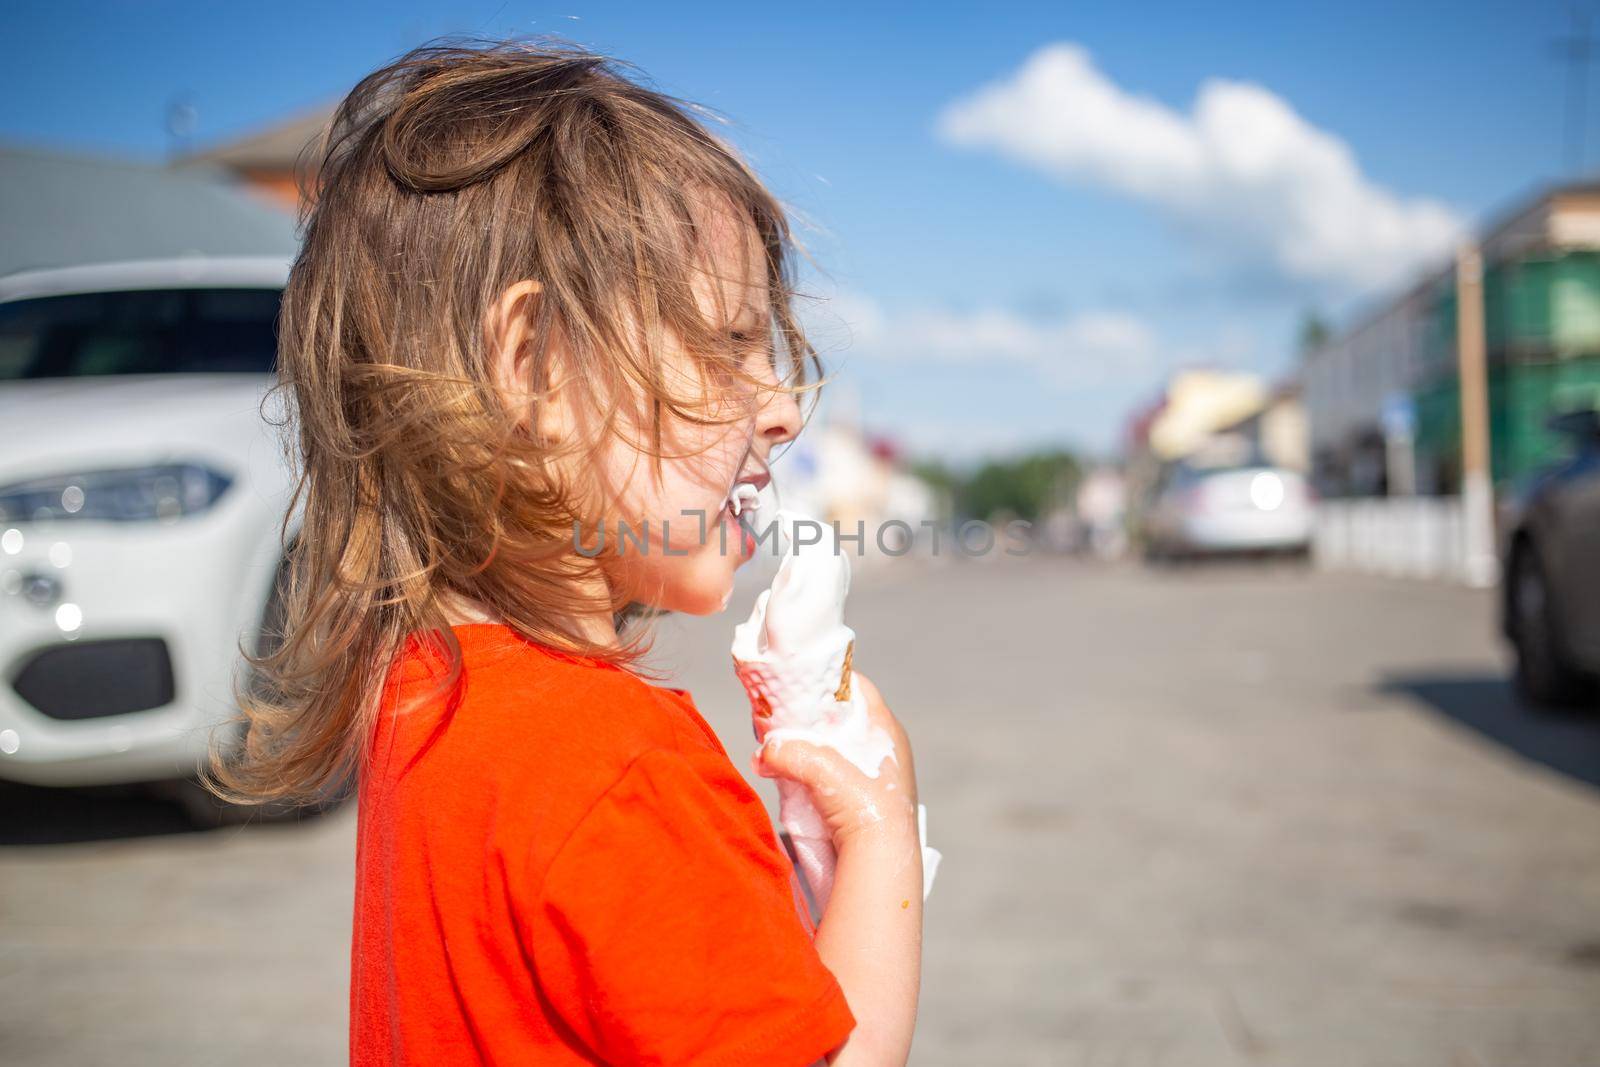 little girl eating an ice cream cone on a hot day outside. ice cream melts and flows by Mariaprovector